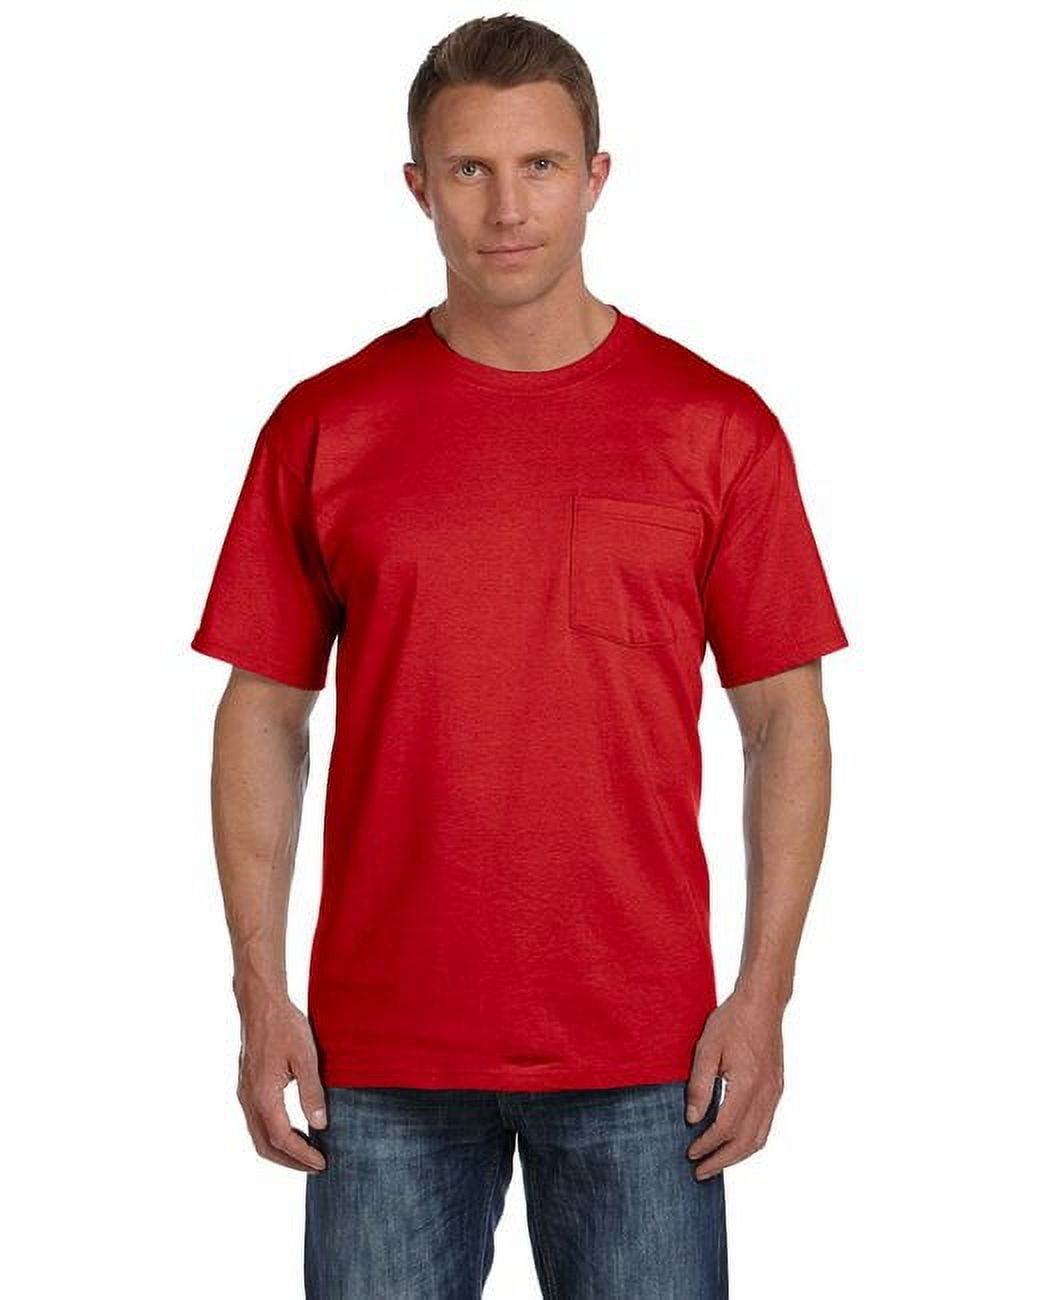 Fruit of the Loom,Men's,None,Pocket TEE,TRUE RED,x-large,1 Pack ...